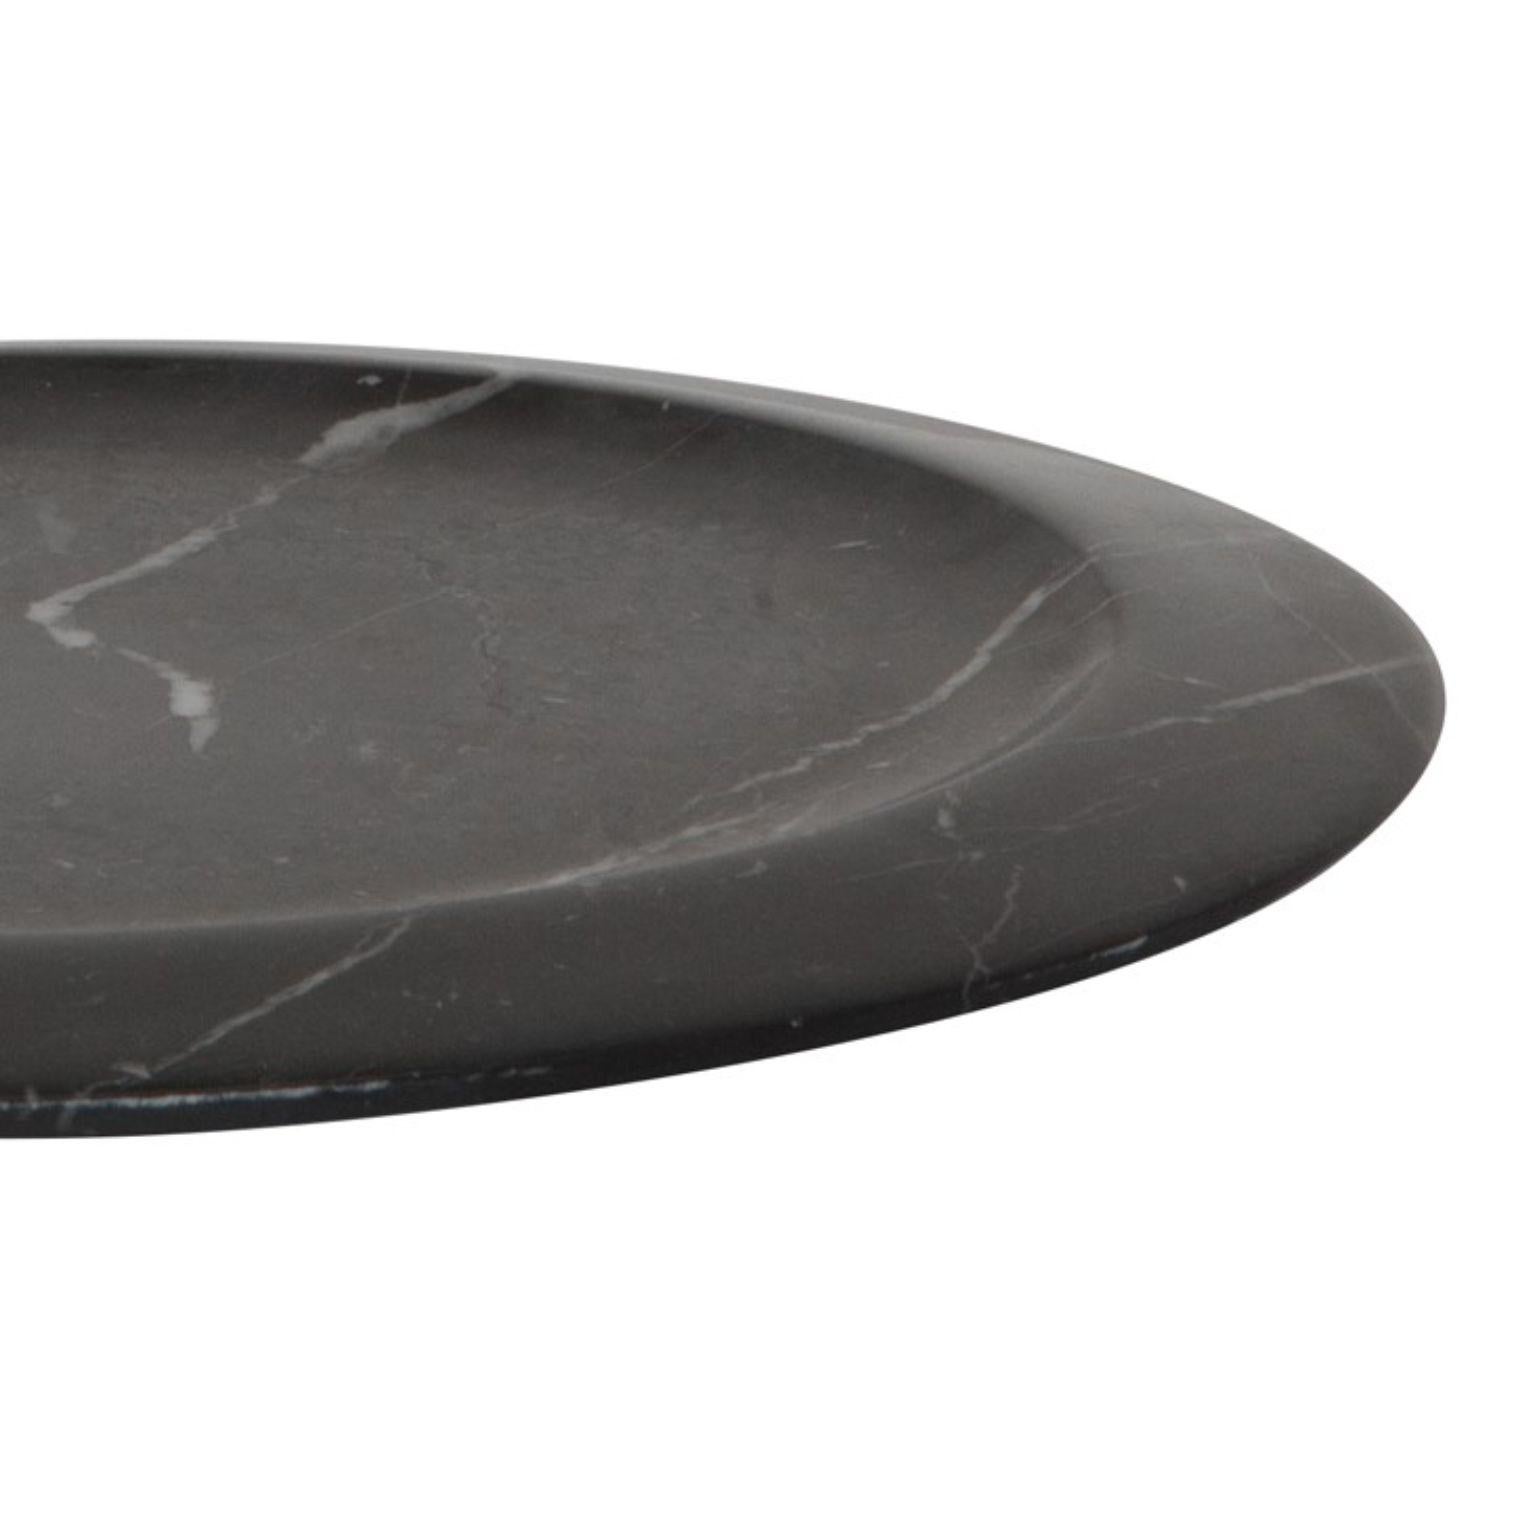 Modern Piatto Piano #2, Dining Plate, Black by Ivan Colominas